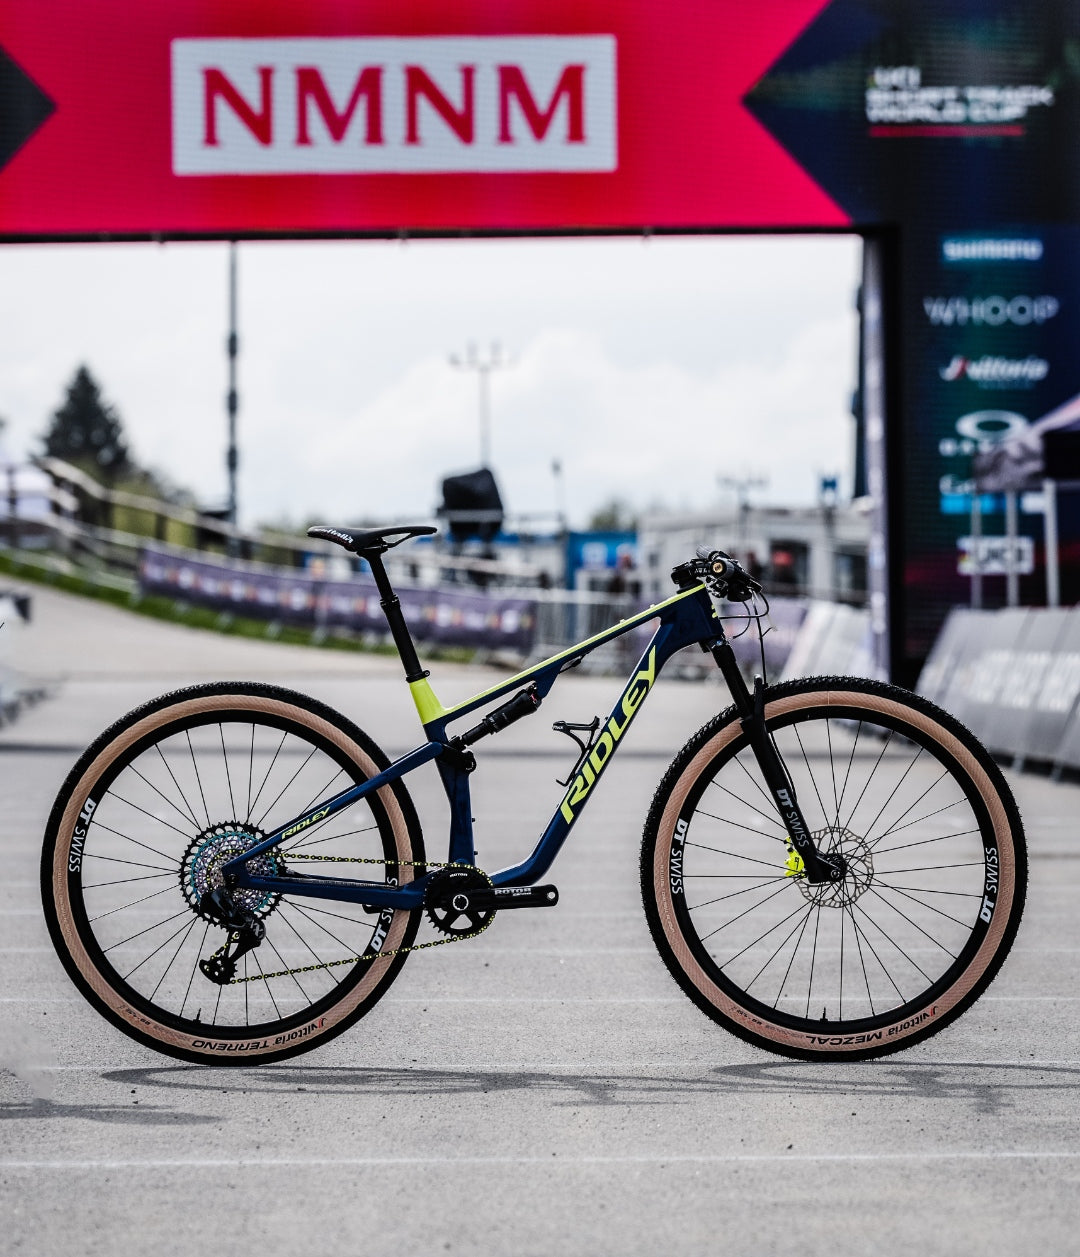 Behind the Scenes: A Mechanic's Perspective on the UCI Mountain Bike World Cup